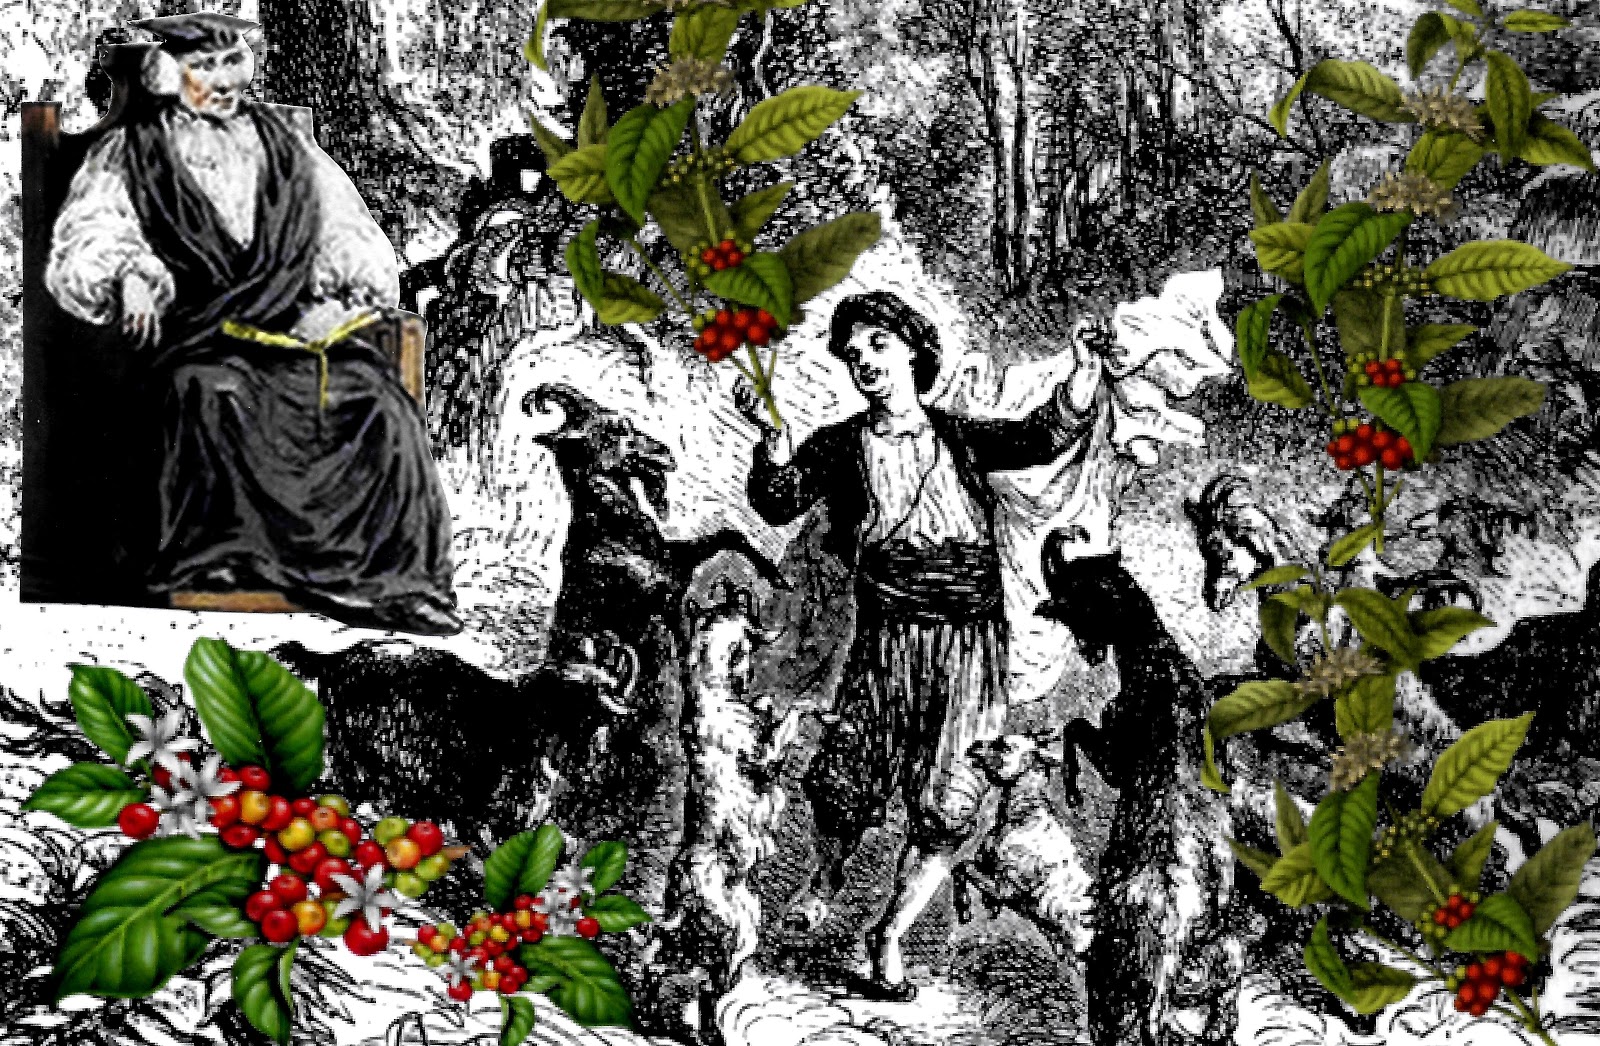 Kaldi, a teenaged boy, and his goats dance surrounded by coffee plants while a seated bishop watches.